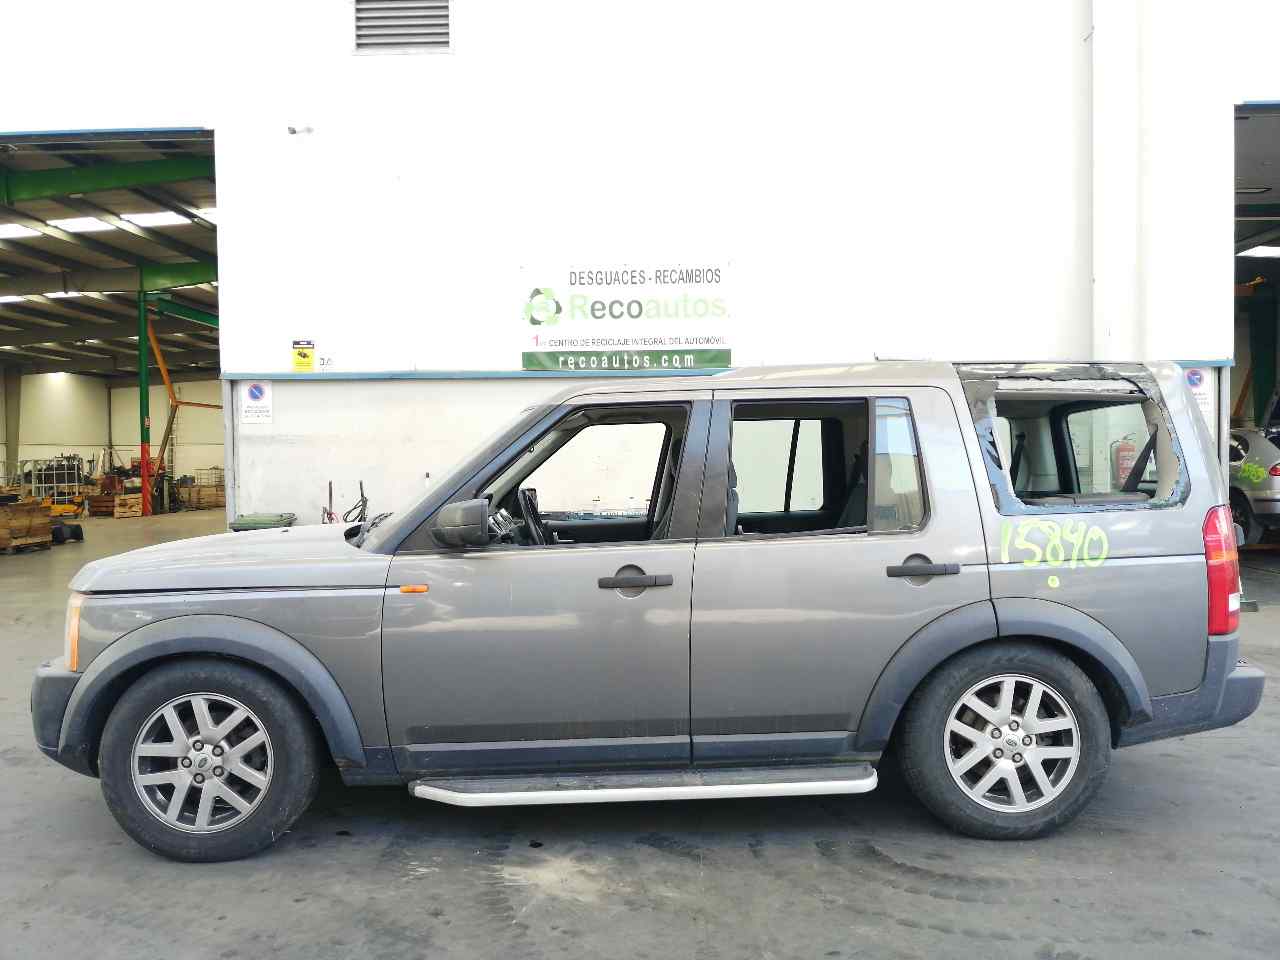 LAND ROVER Discovery 4 generation (2009-2016) Части моторного отсека KKB500441G, 3618398125 19826348